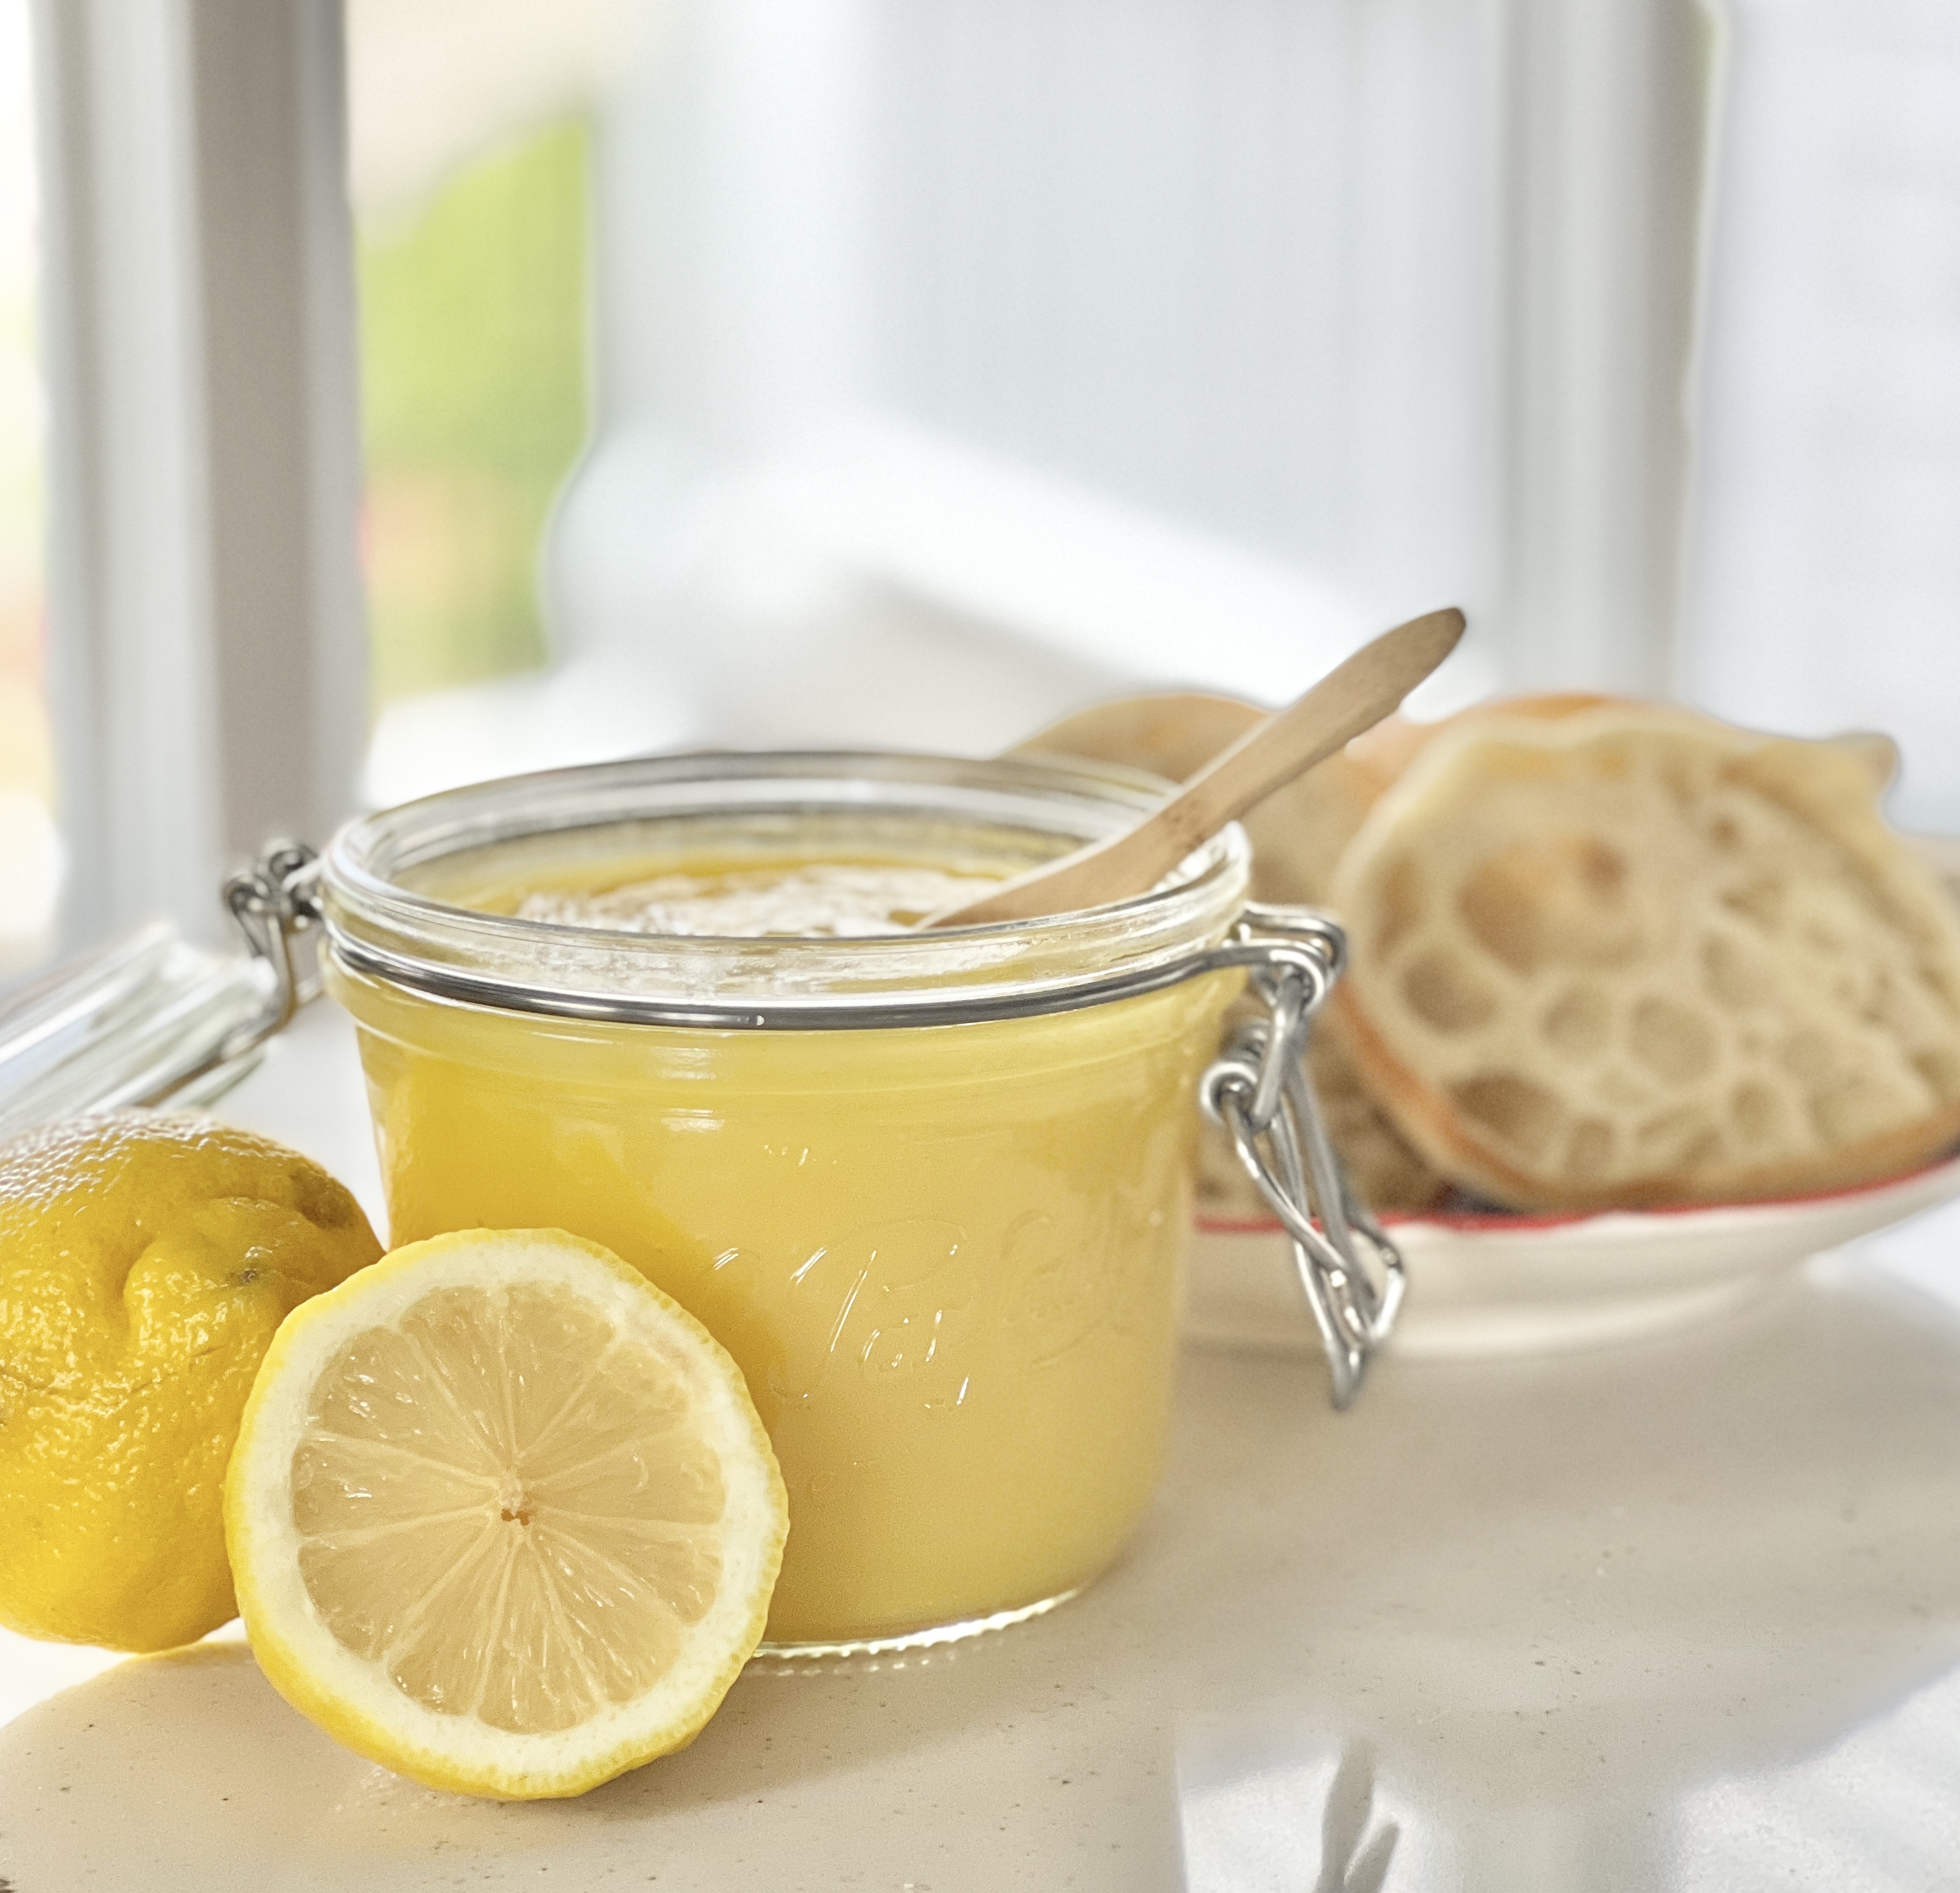 Lemon curd in a glass jar beside a plate of english muffins.